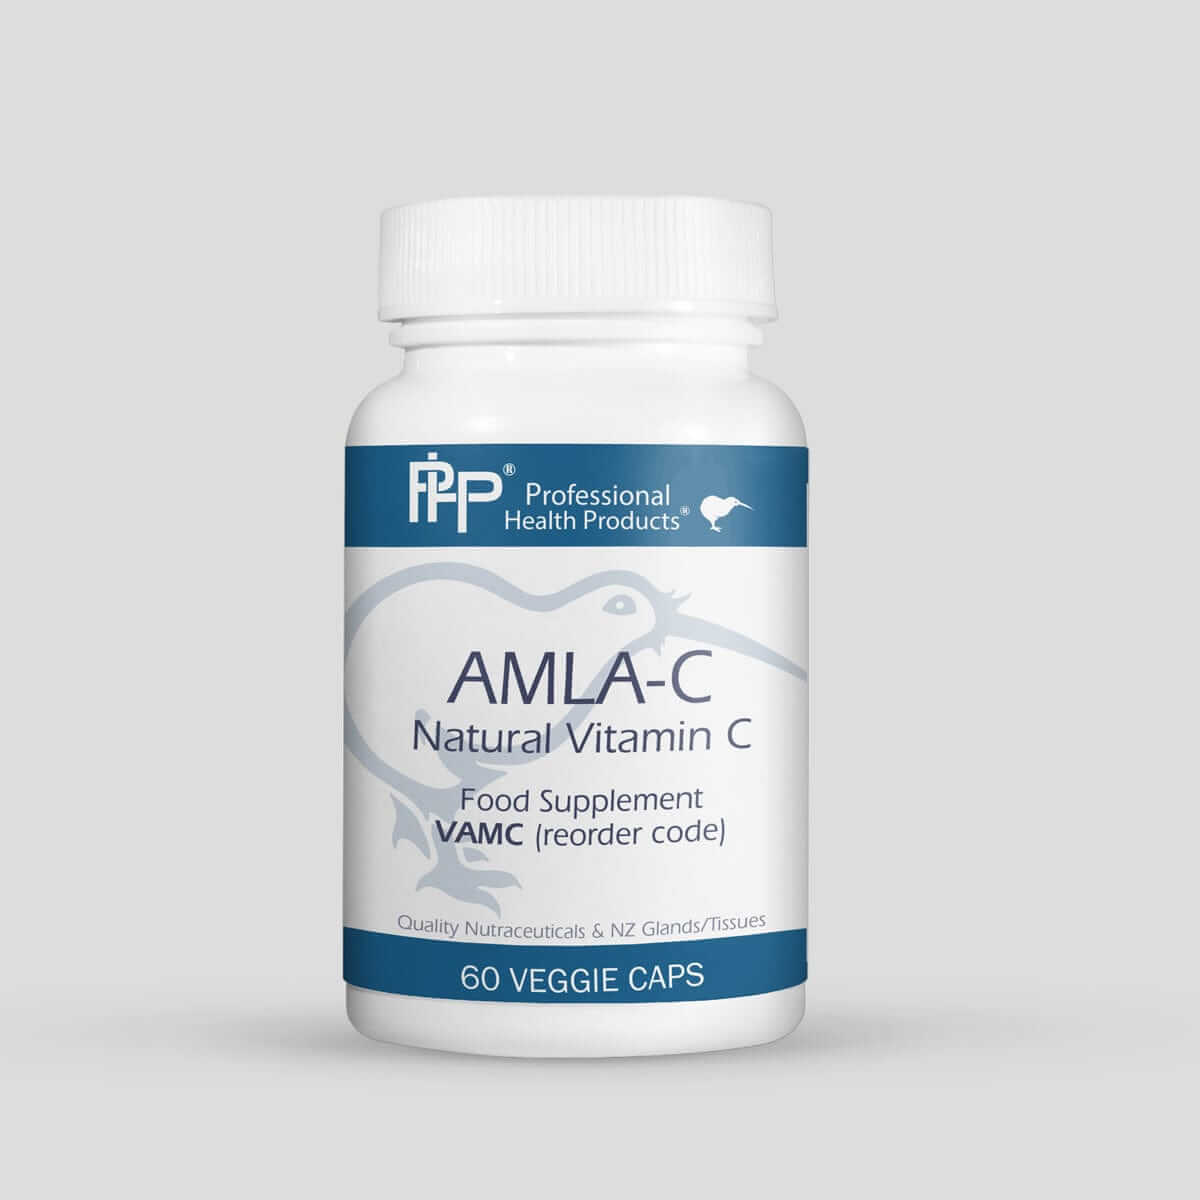 AMLA-C (Natural Vitamin C) * Prof Health Products Supplement - Conners Clinic